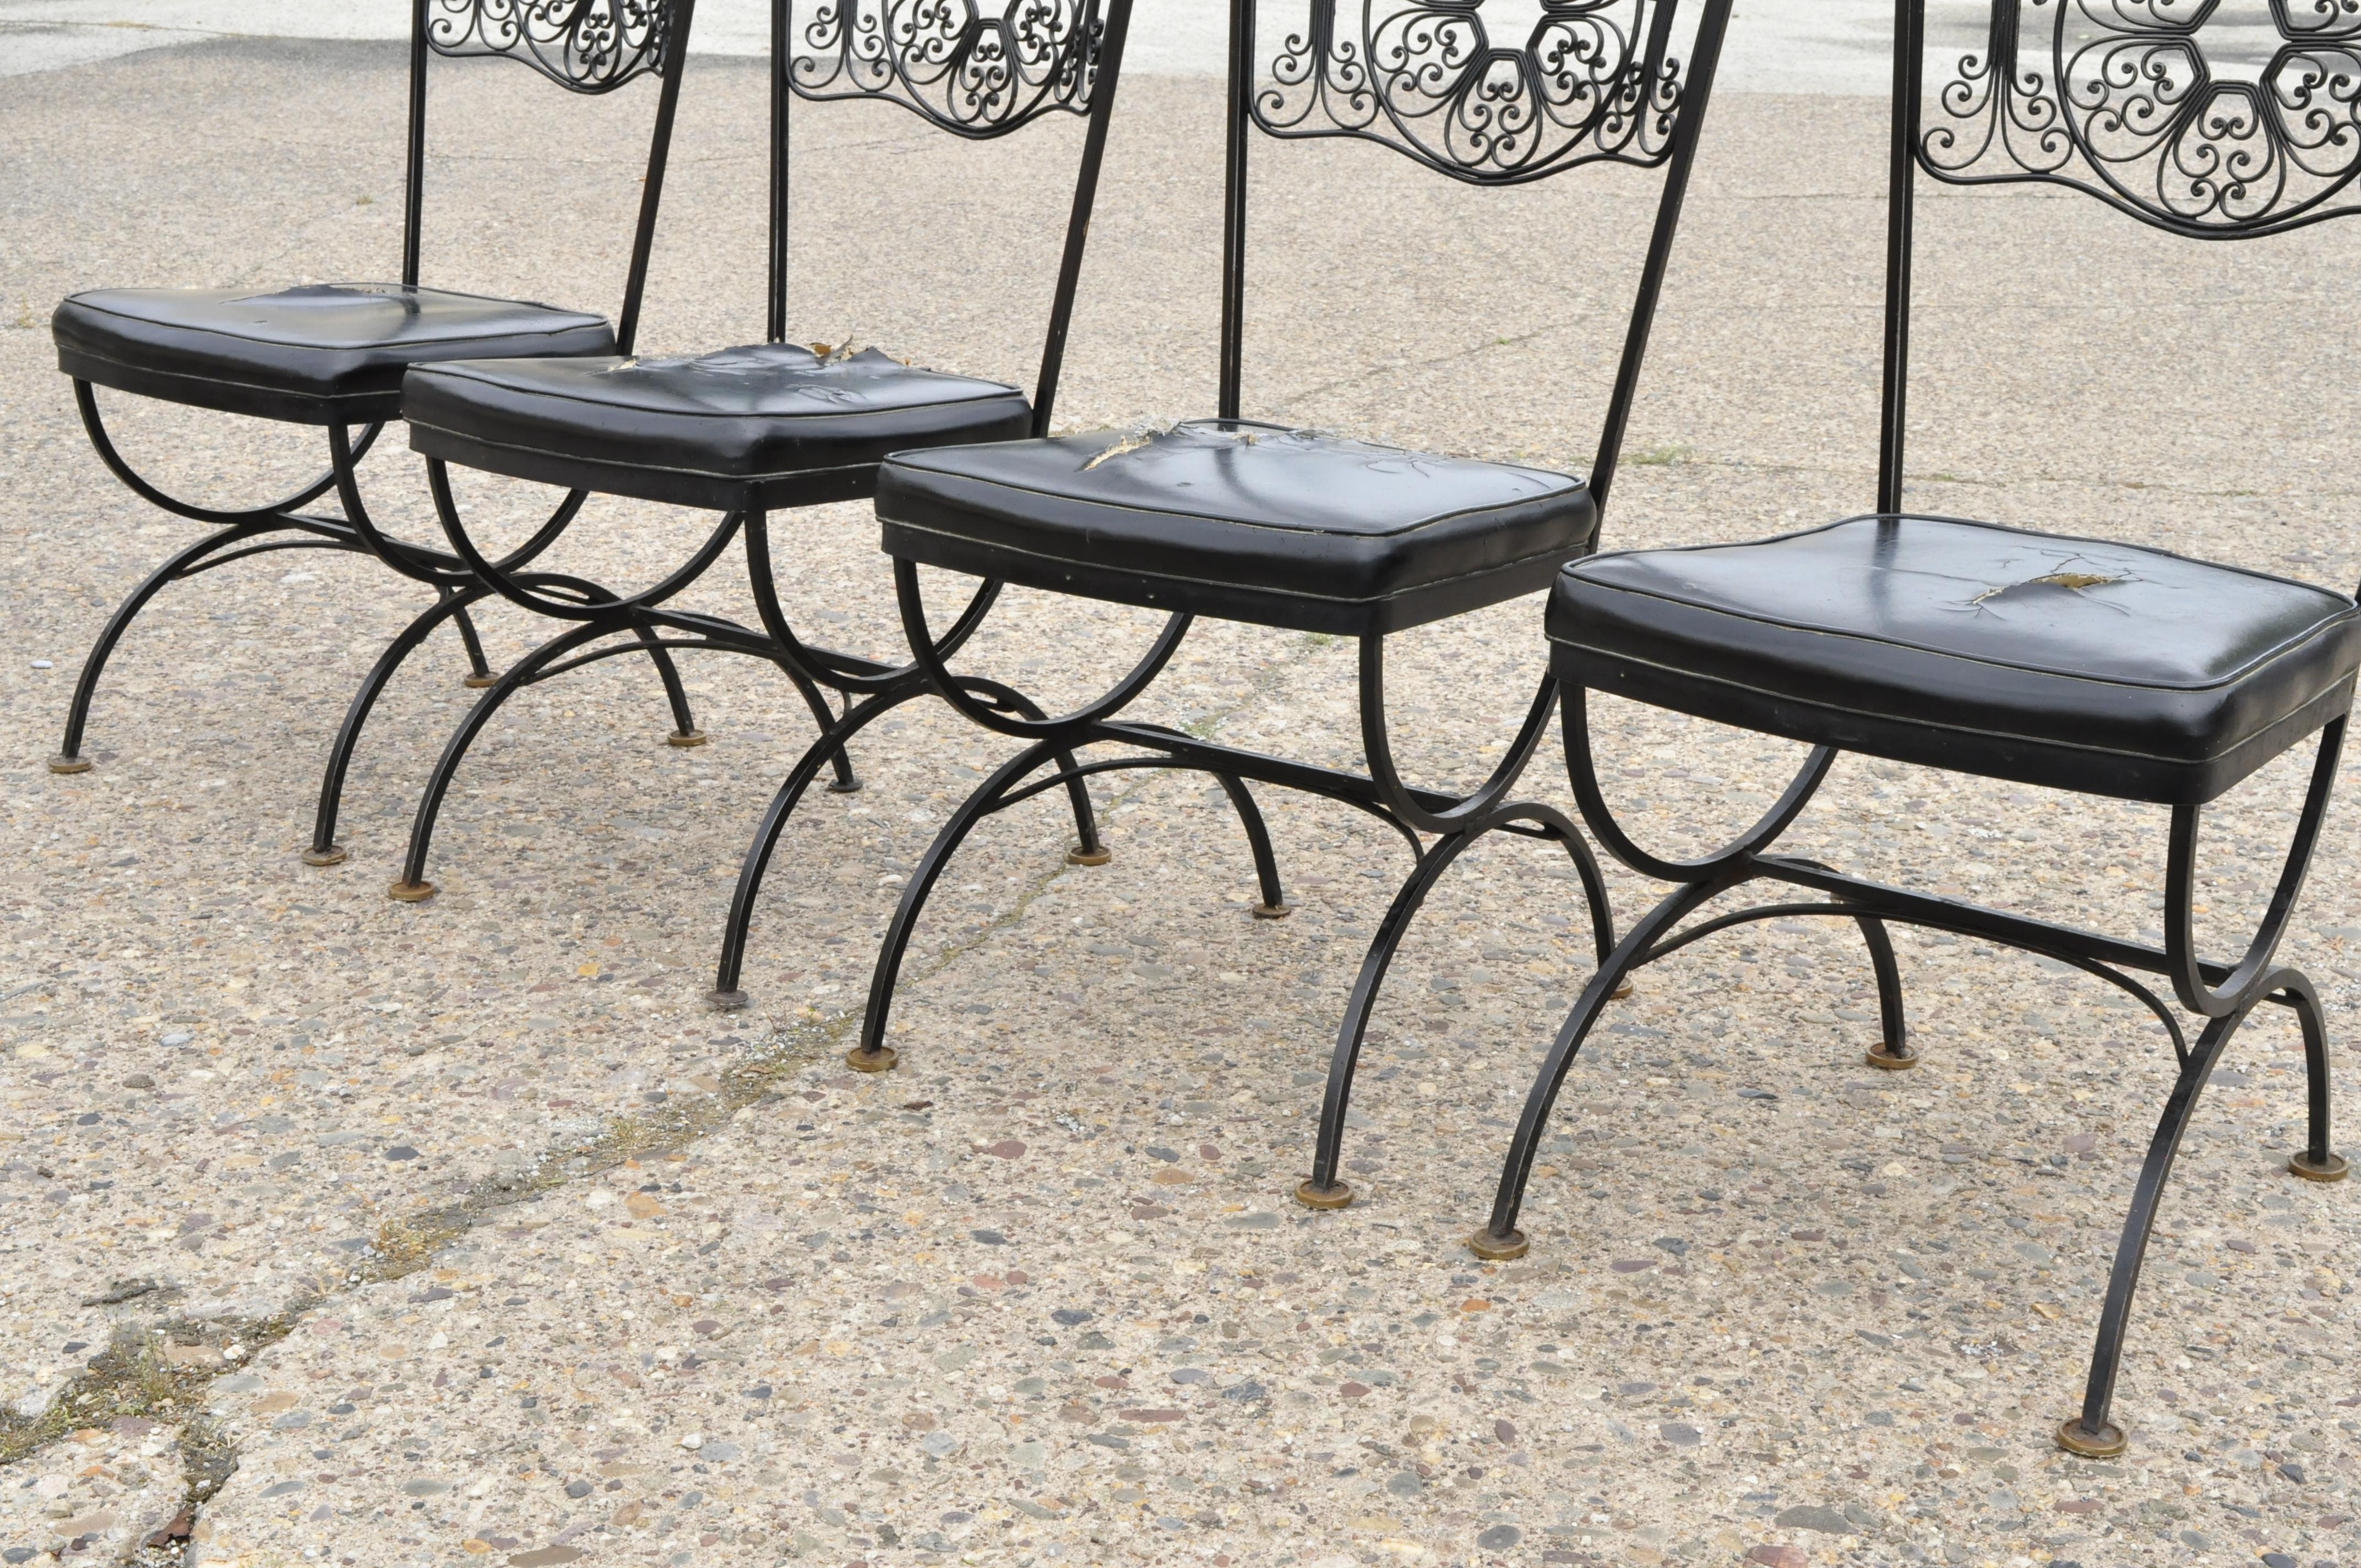 American 4 Vintage Woodard Andalusian Style Wrought Iron Dining Chairs by Contempo Frames